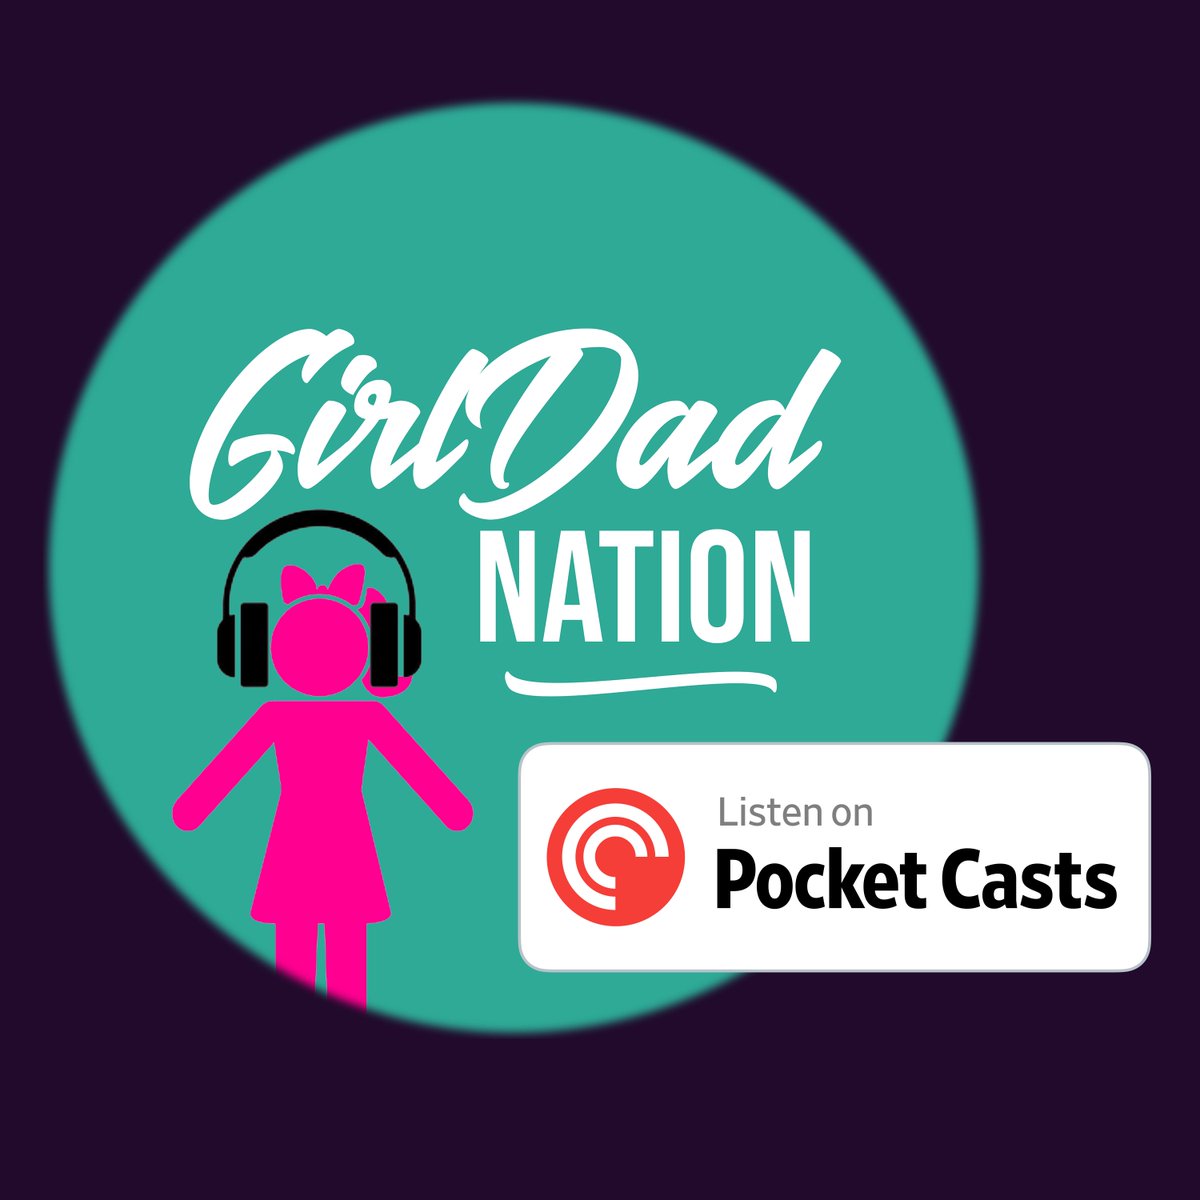 Girl Dad Nation is now available on Pocket Casts. Listen now!

Stories and Dad Hacks from Dads of Daughters 

@pocketcasts 

#girldadnation #girldad #dadanddaughter 
#dadpodcast #dadpod #pocketcasts 
#dadstories #dadsofinstagram #dadhacks